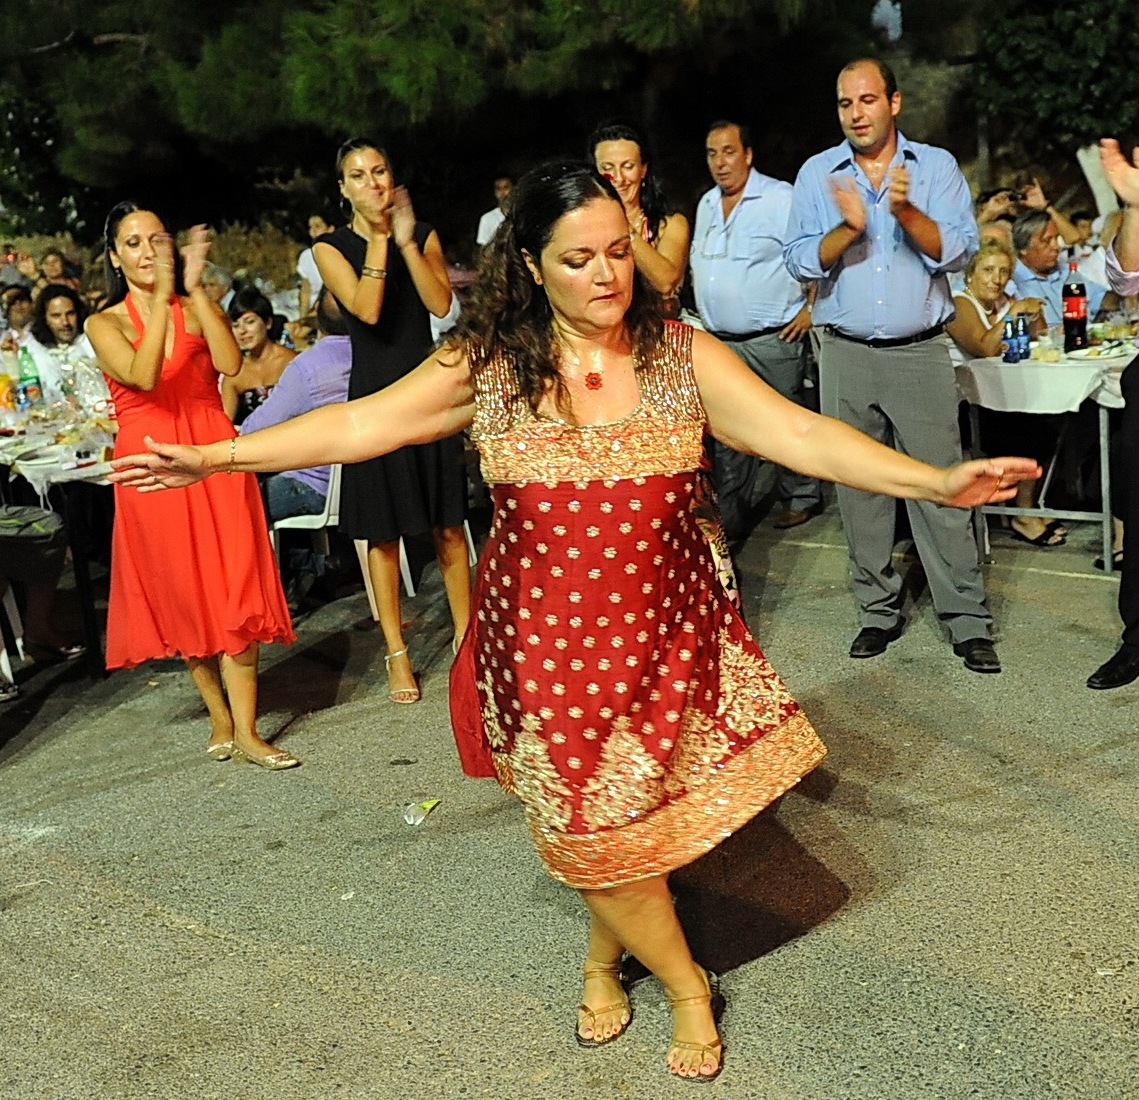 An Apology of a Cretan: Being Greek in the 21st century is...